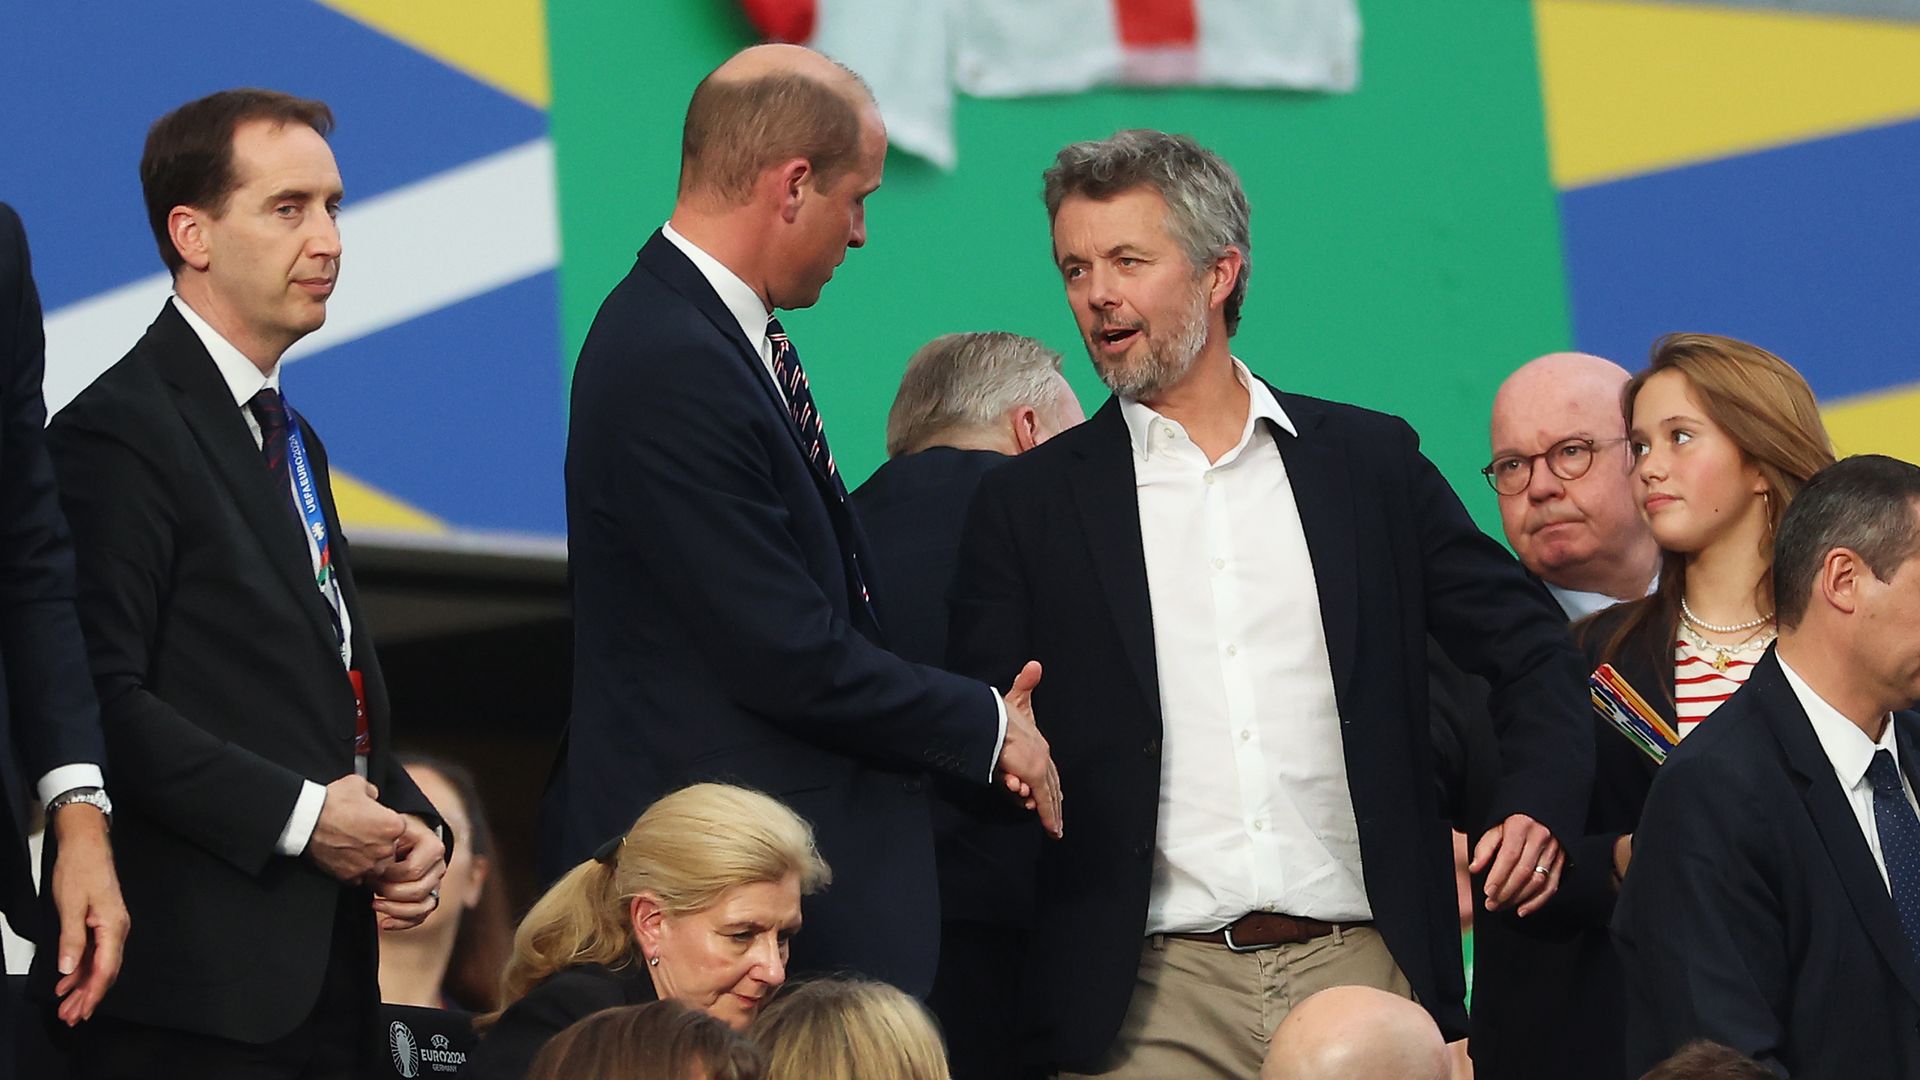 Prince William and King Frederik shaking hands